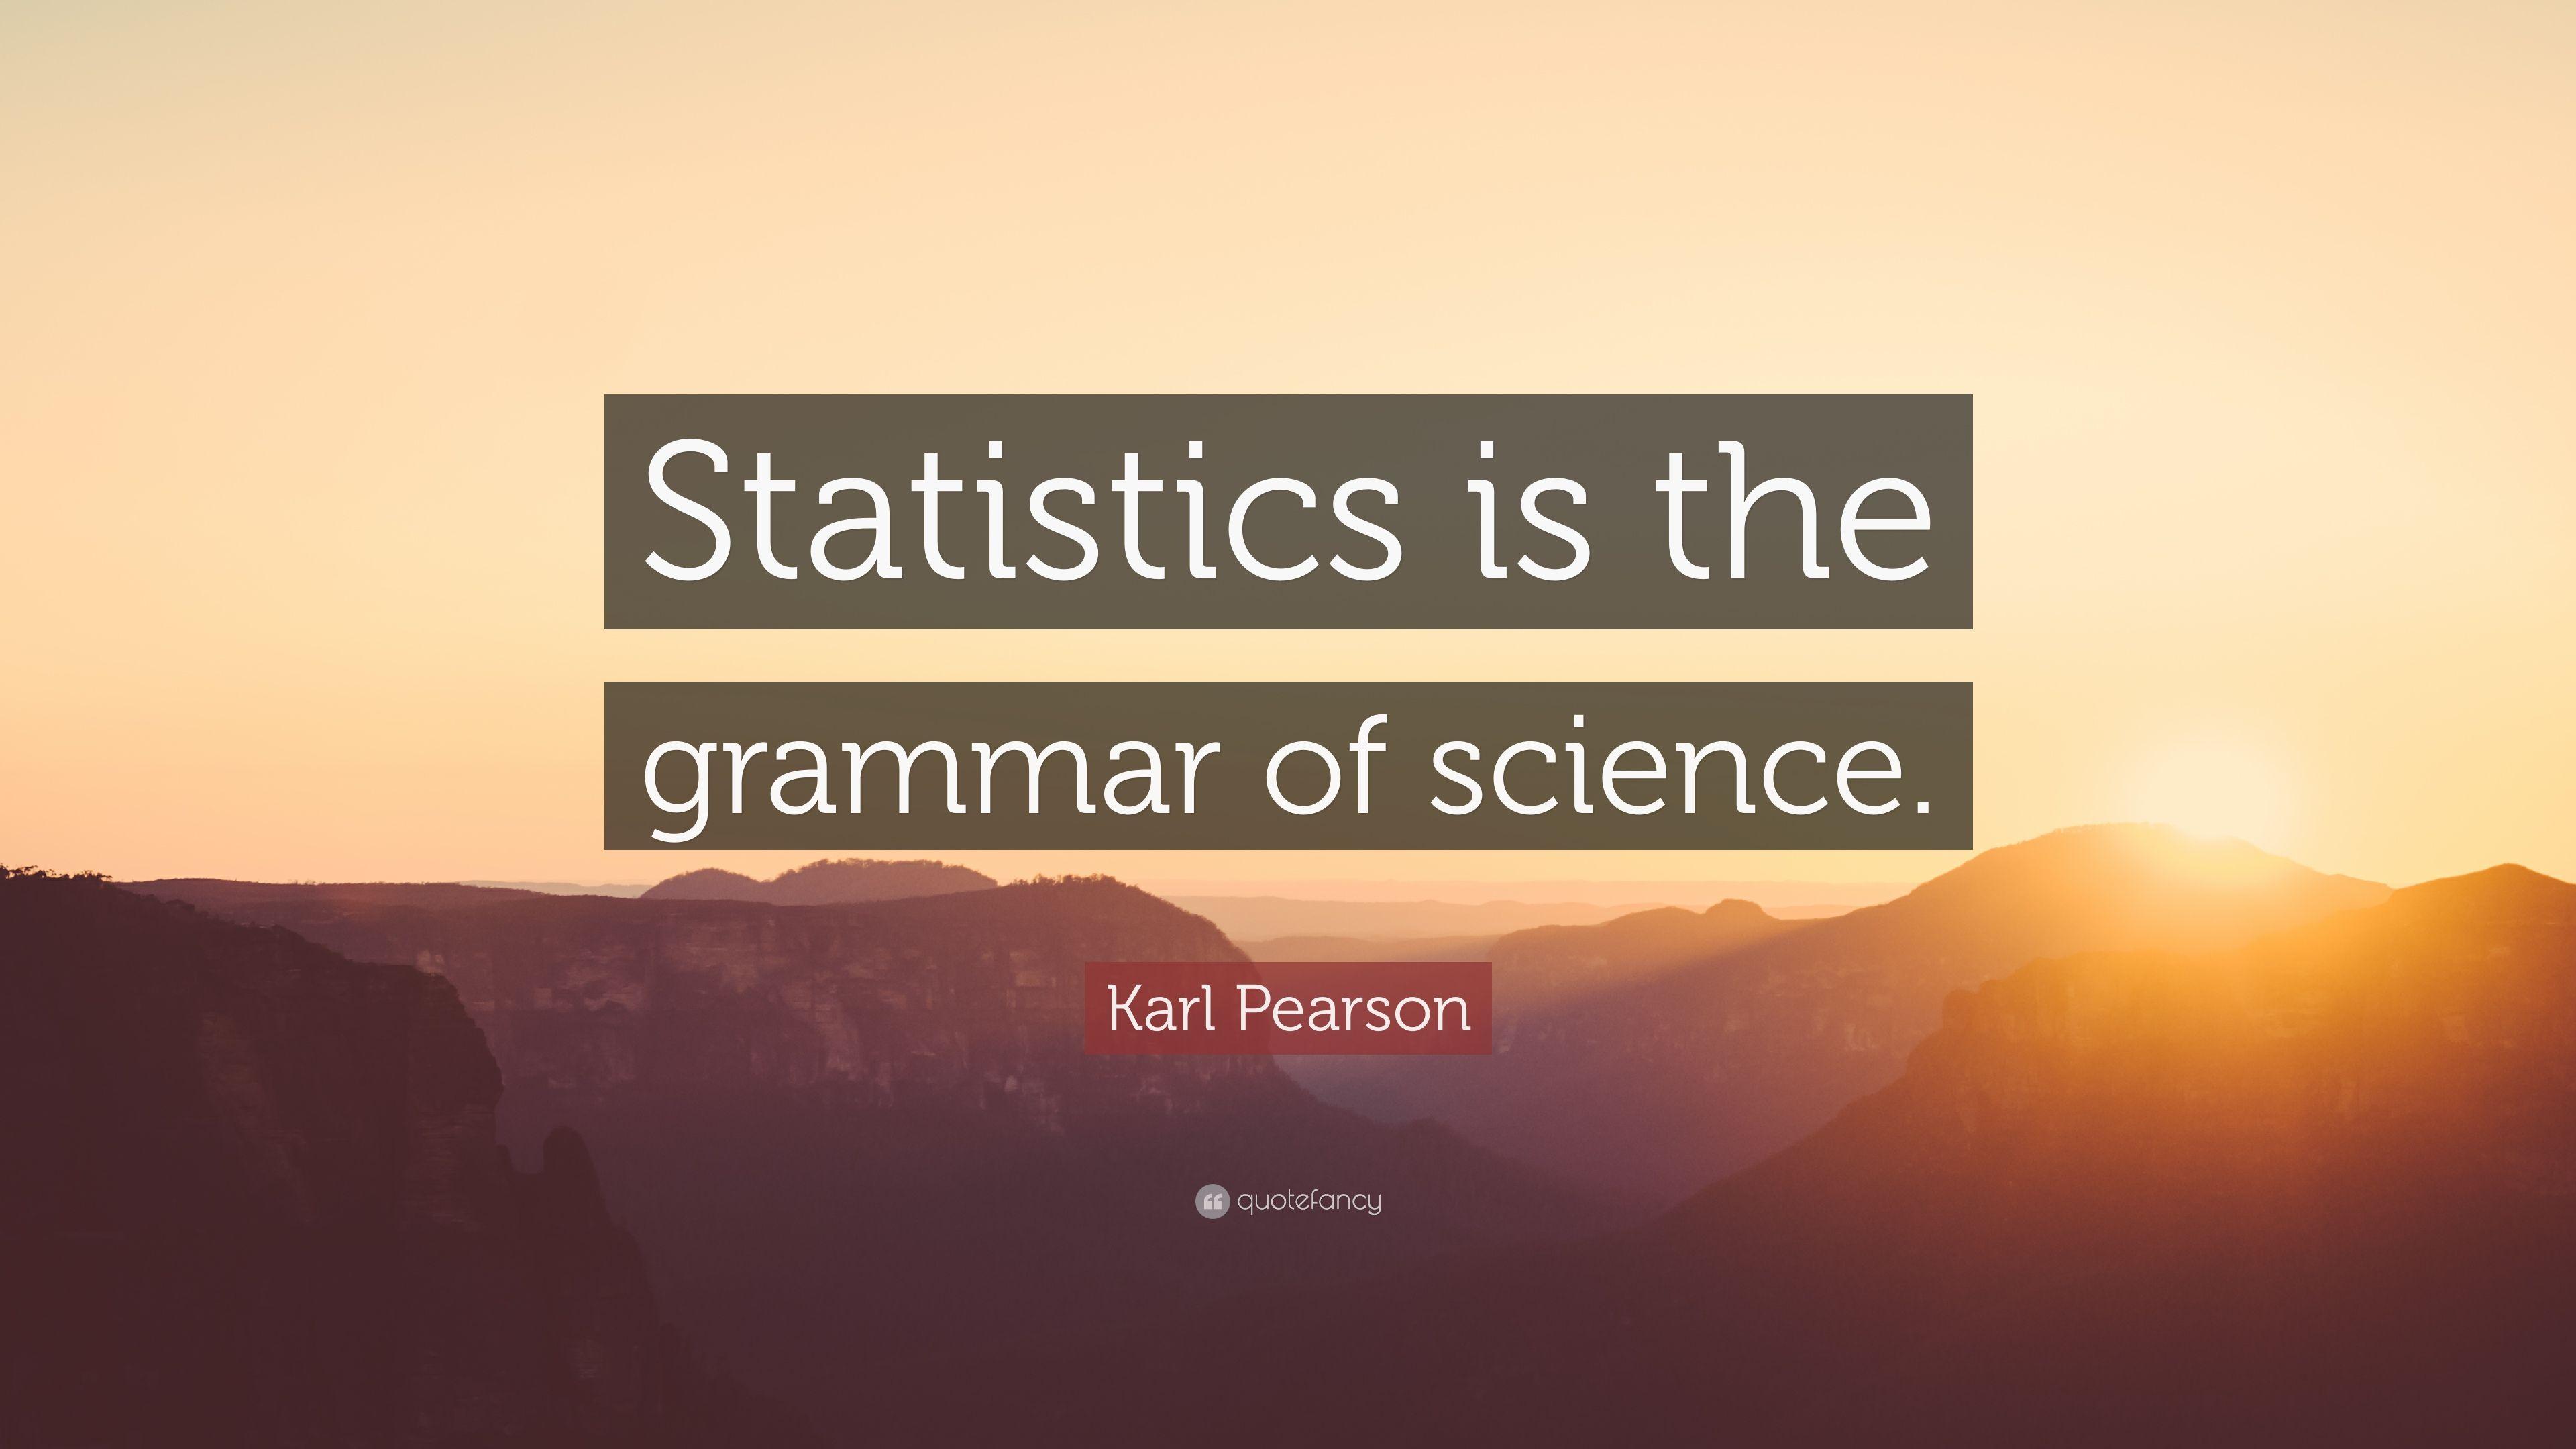 Karl Pearson Quote: “Statistics is the grammar of science.” (12 wallpaper)